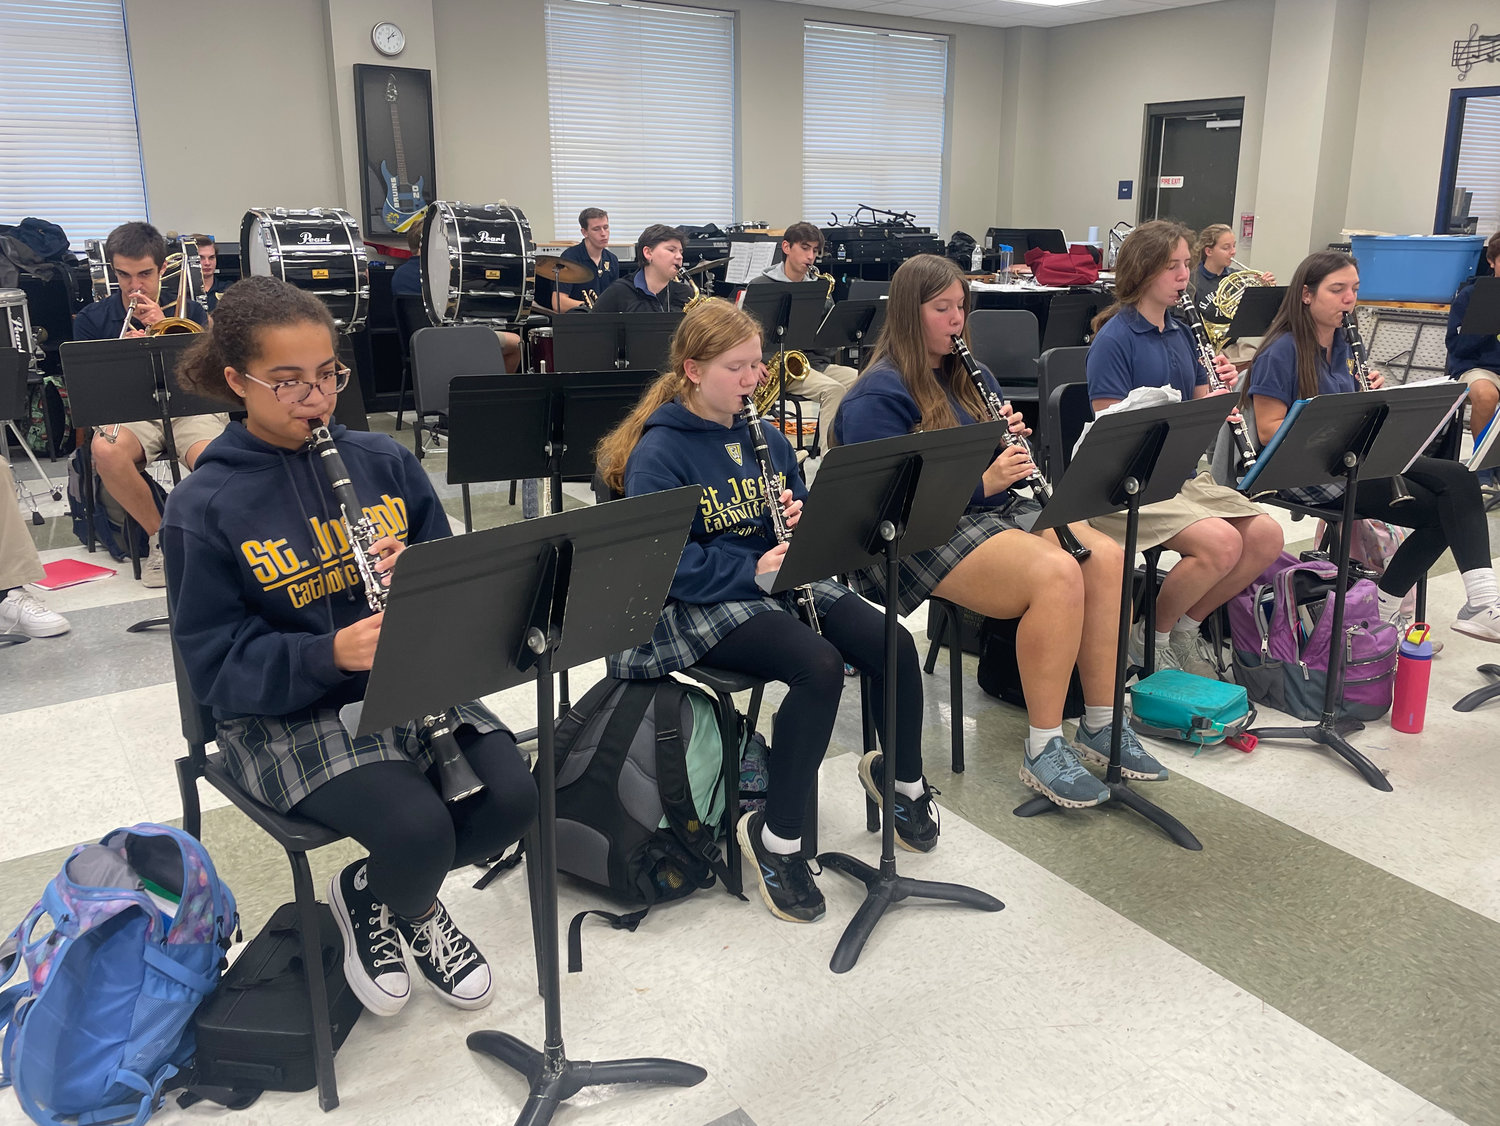 Student musicians practice for the 2022 edition of “Gifts of the Season.” Pictured, from left (front row): Lauryn Blue, Anya Klein, Melanie Moody, Angela Bethea and Lauren Abadie. Back row: Atticus Gomez, left, Lockard Williams, Mary Lee Topik, Jameson Clancy and Madalyn Weisenberger.